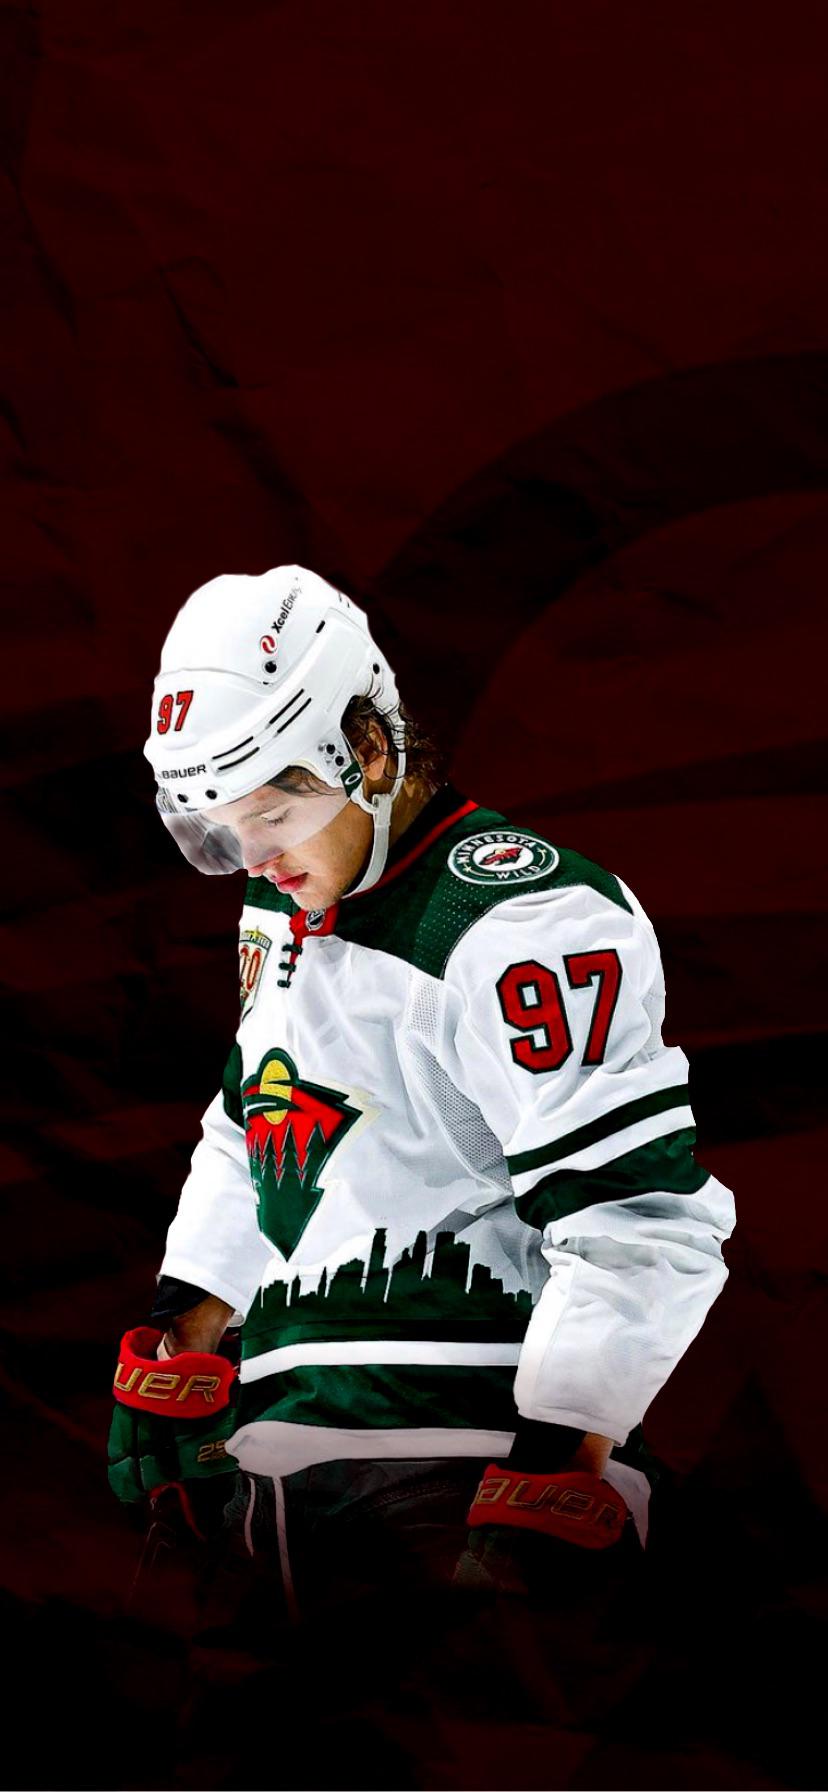 I'm making wallpaper for every nhl franchise. For my first one I made Kirill